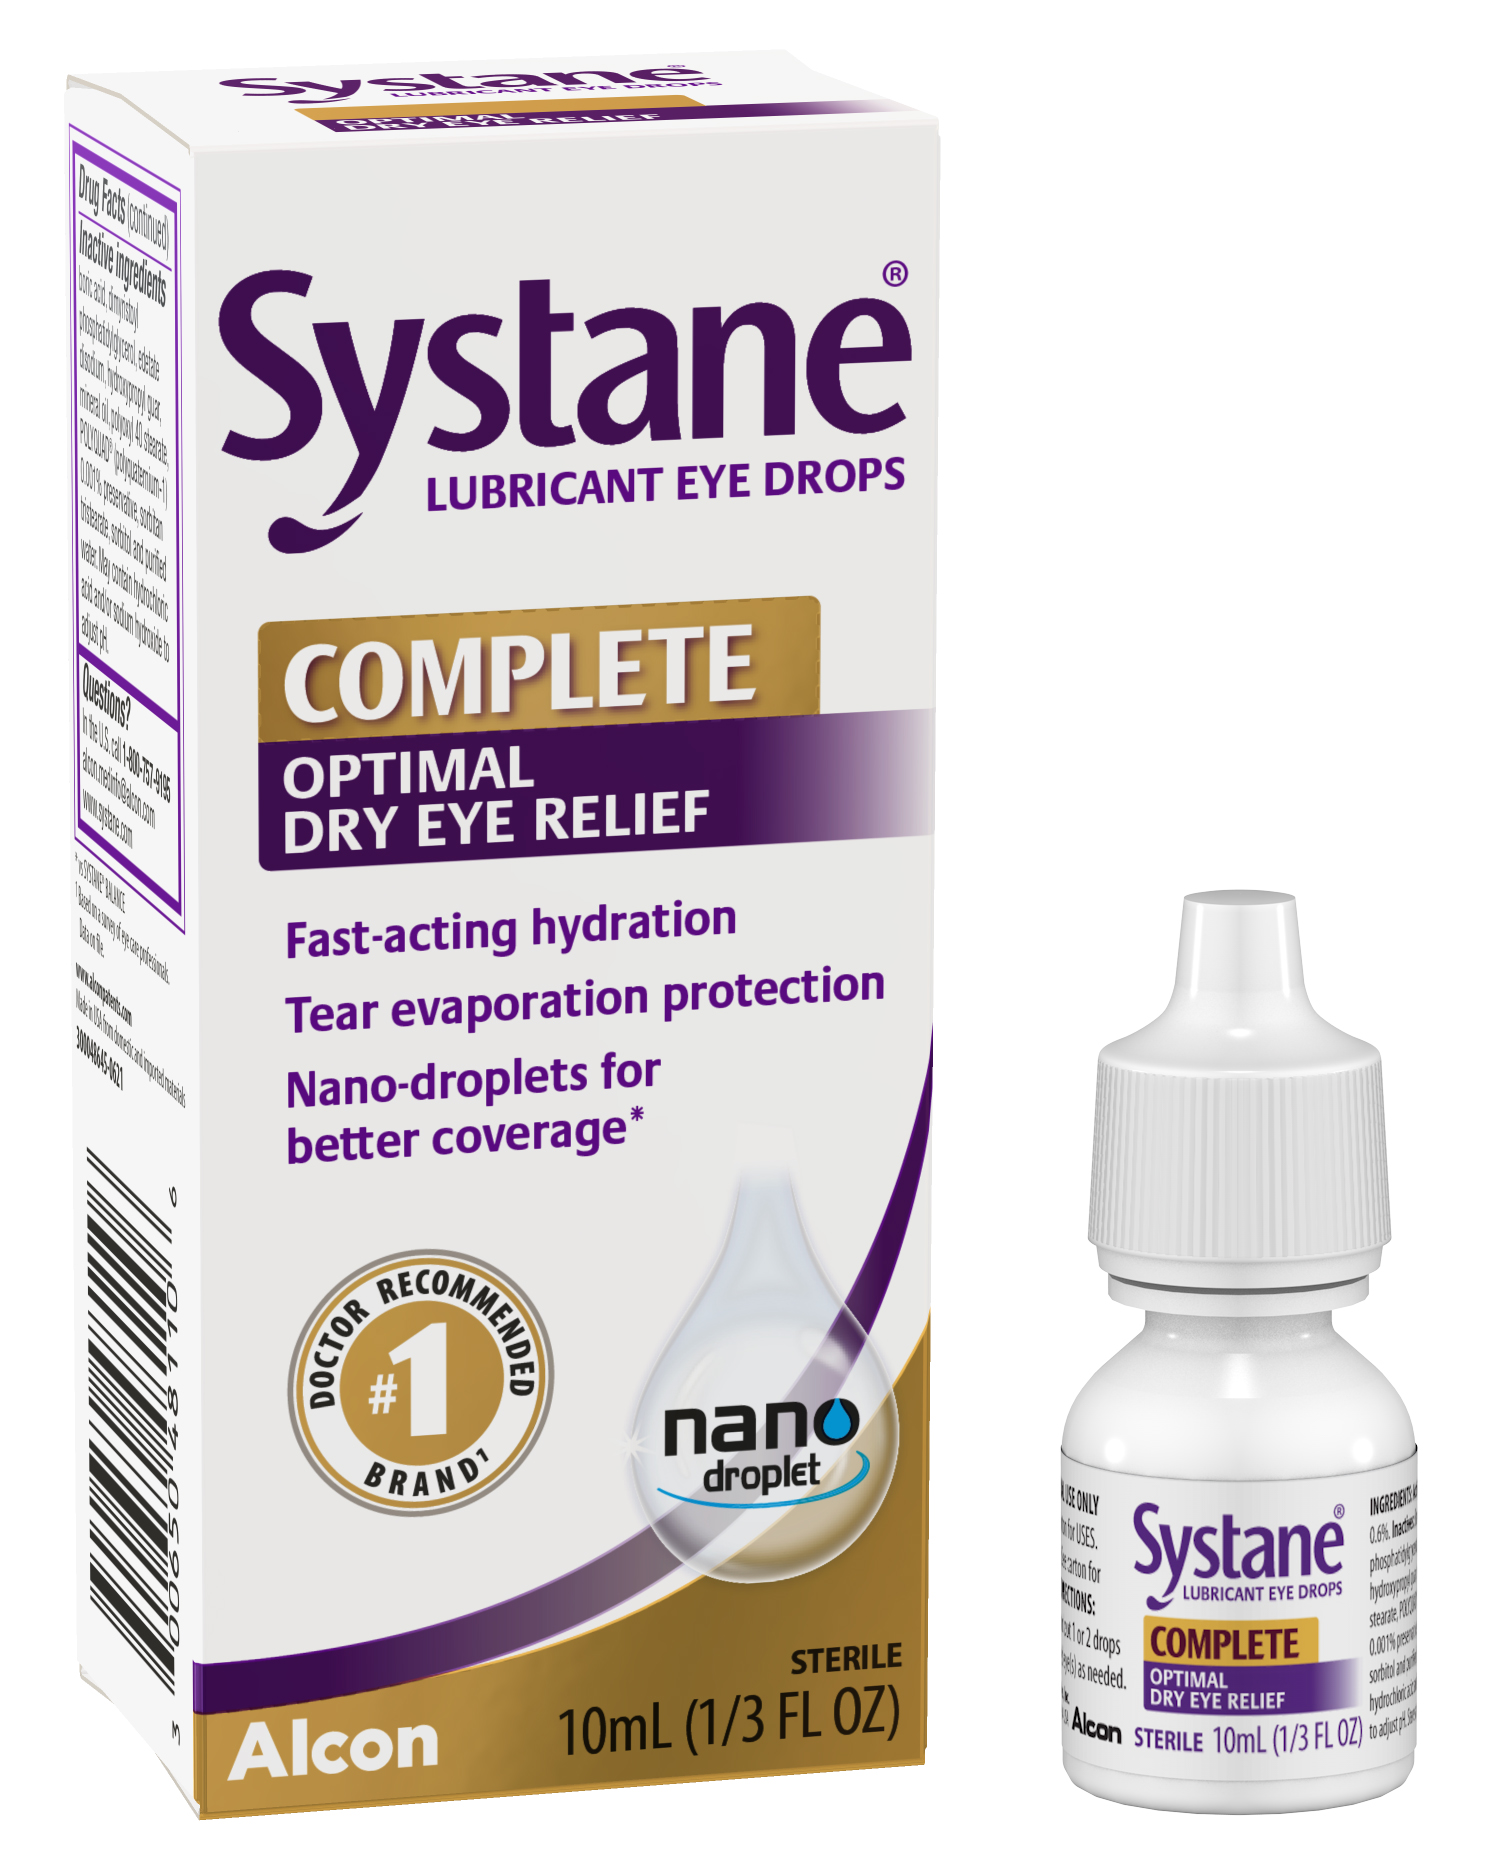 Systane Complete Dry Eye Care Symptom Relief Eye Drops, 10 ml - image 1 of 8